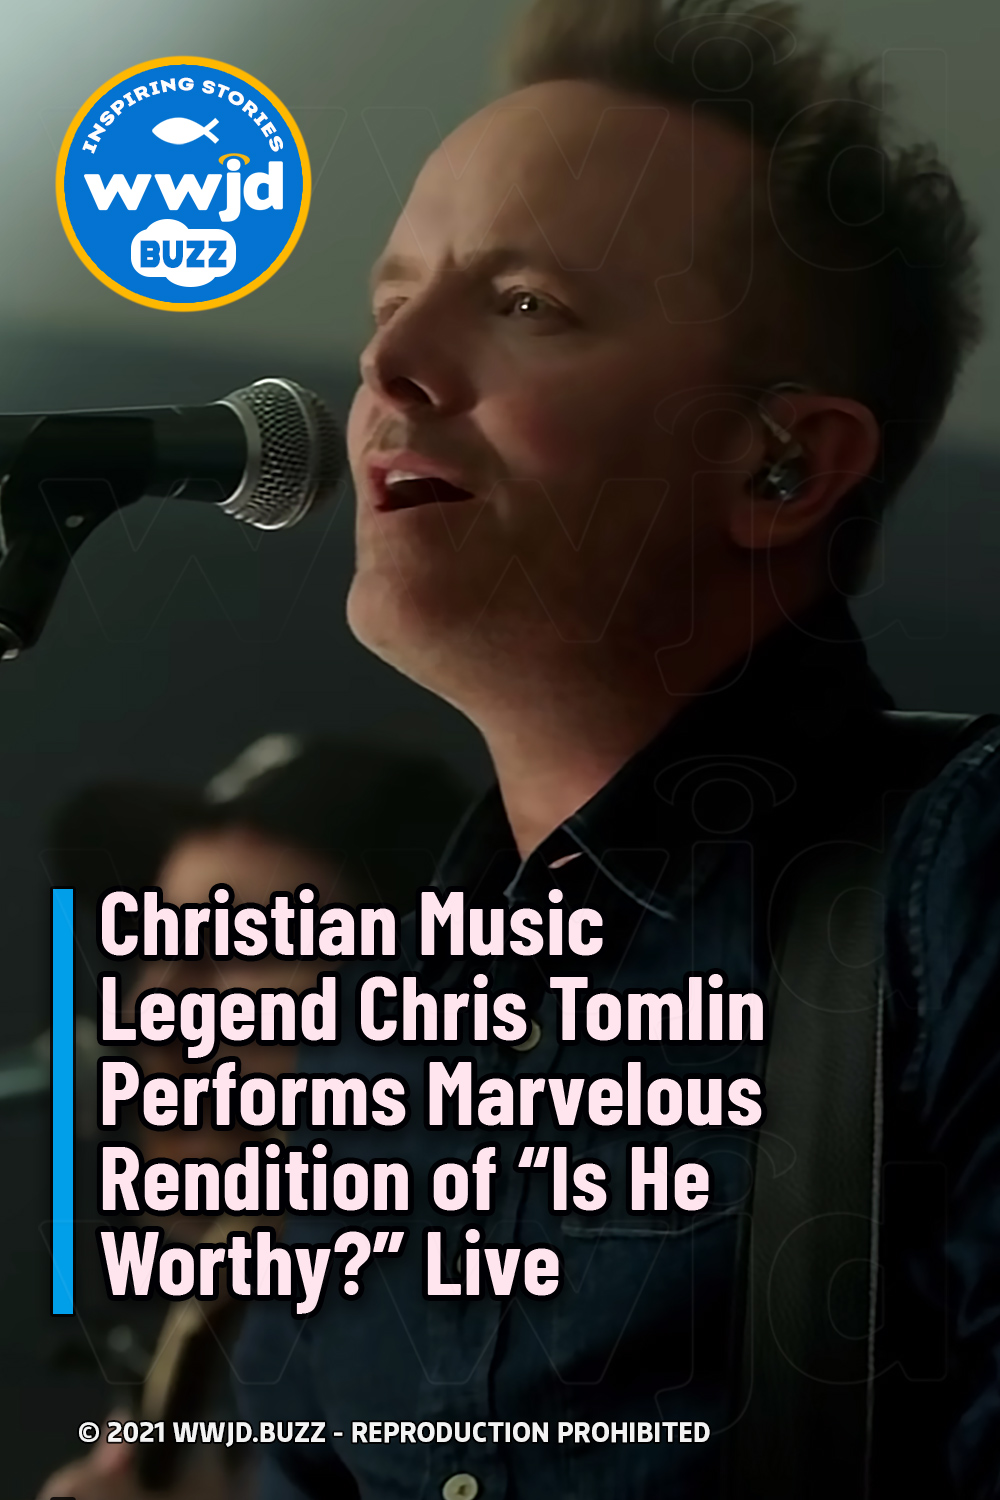 Christian Music Legend Chris Tomlin Performs Marvelous Rendition of “Is He Worthy?” Live